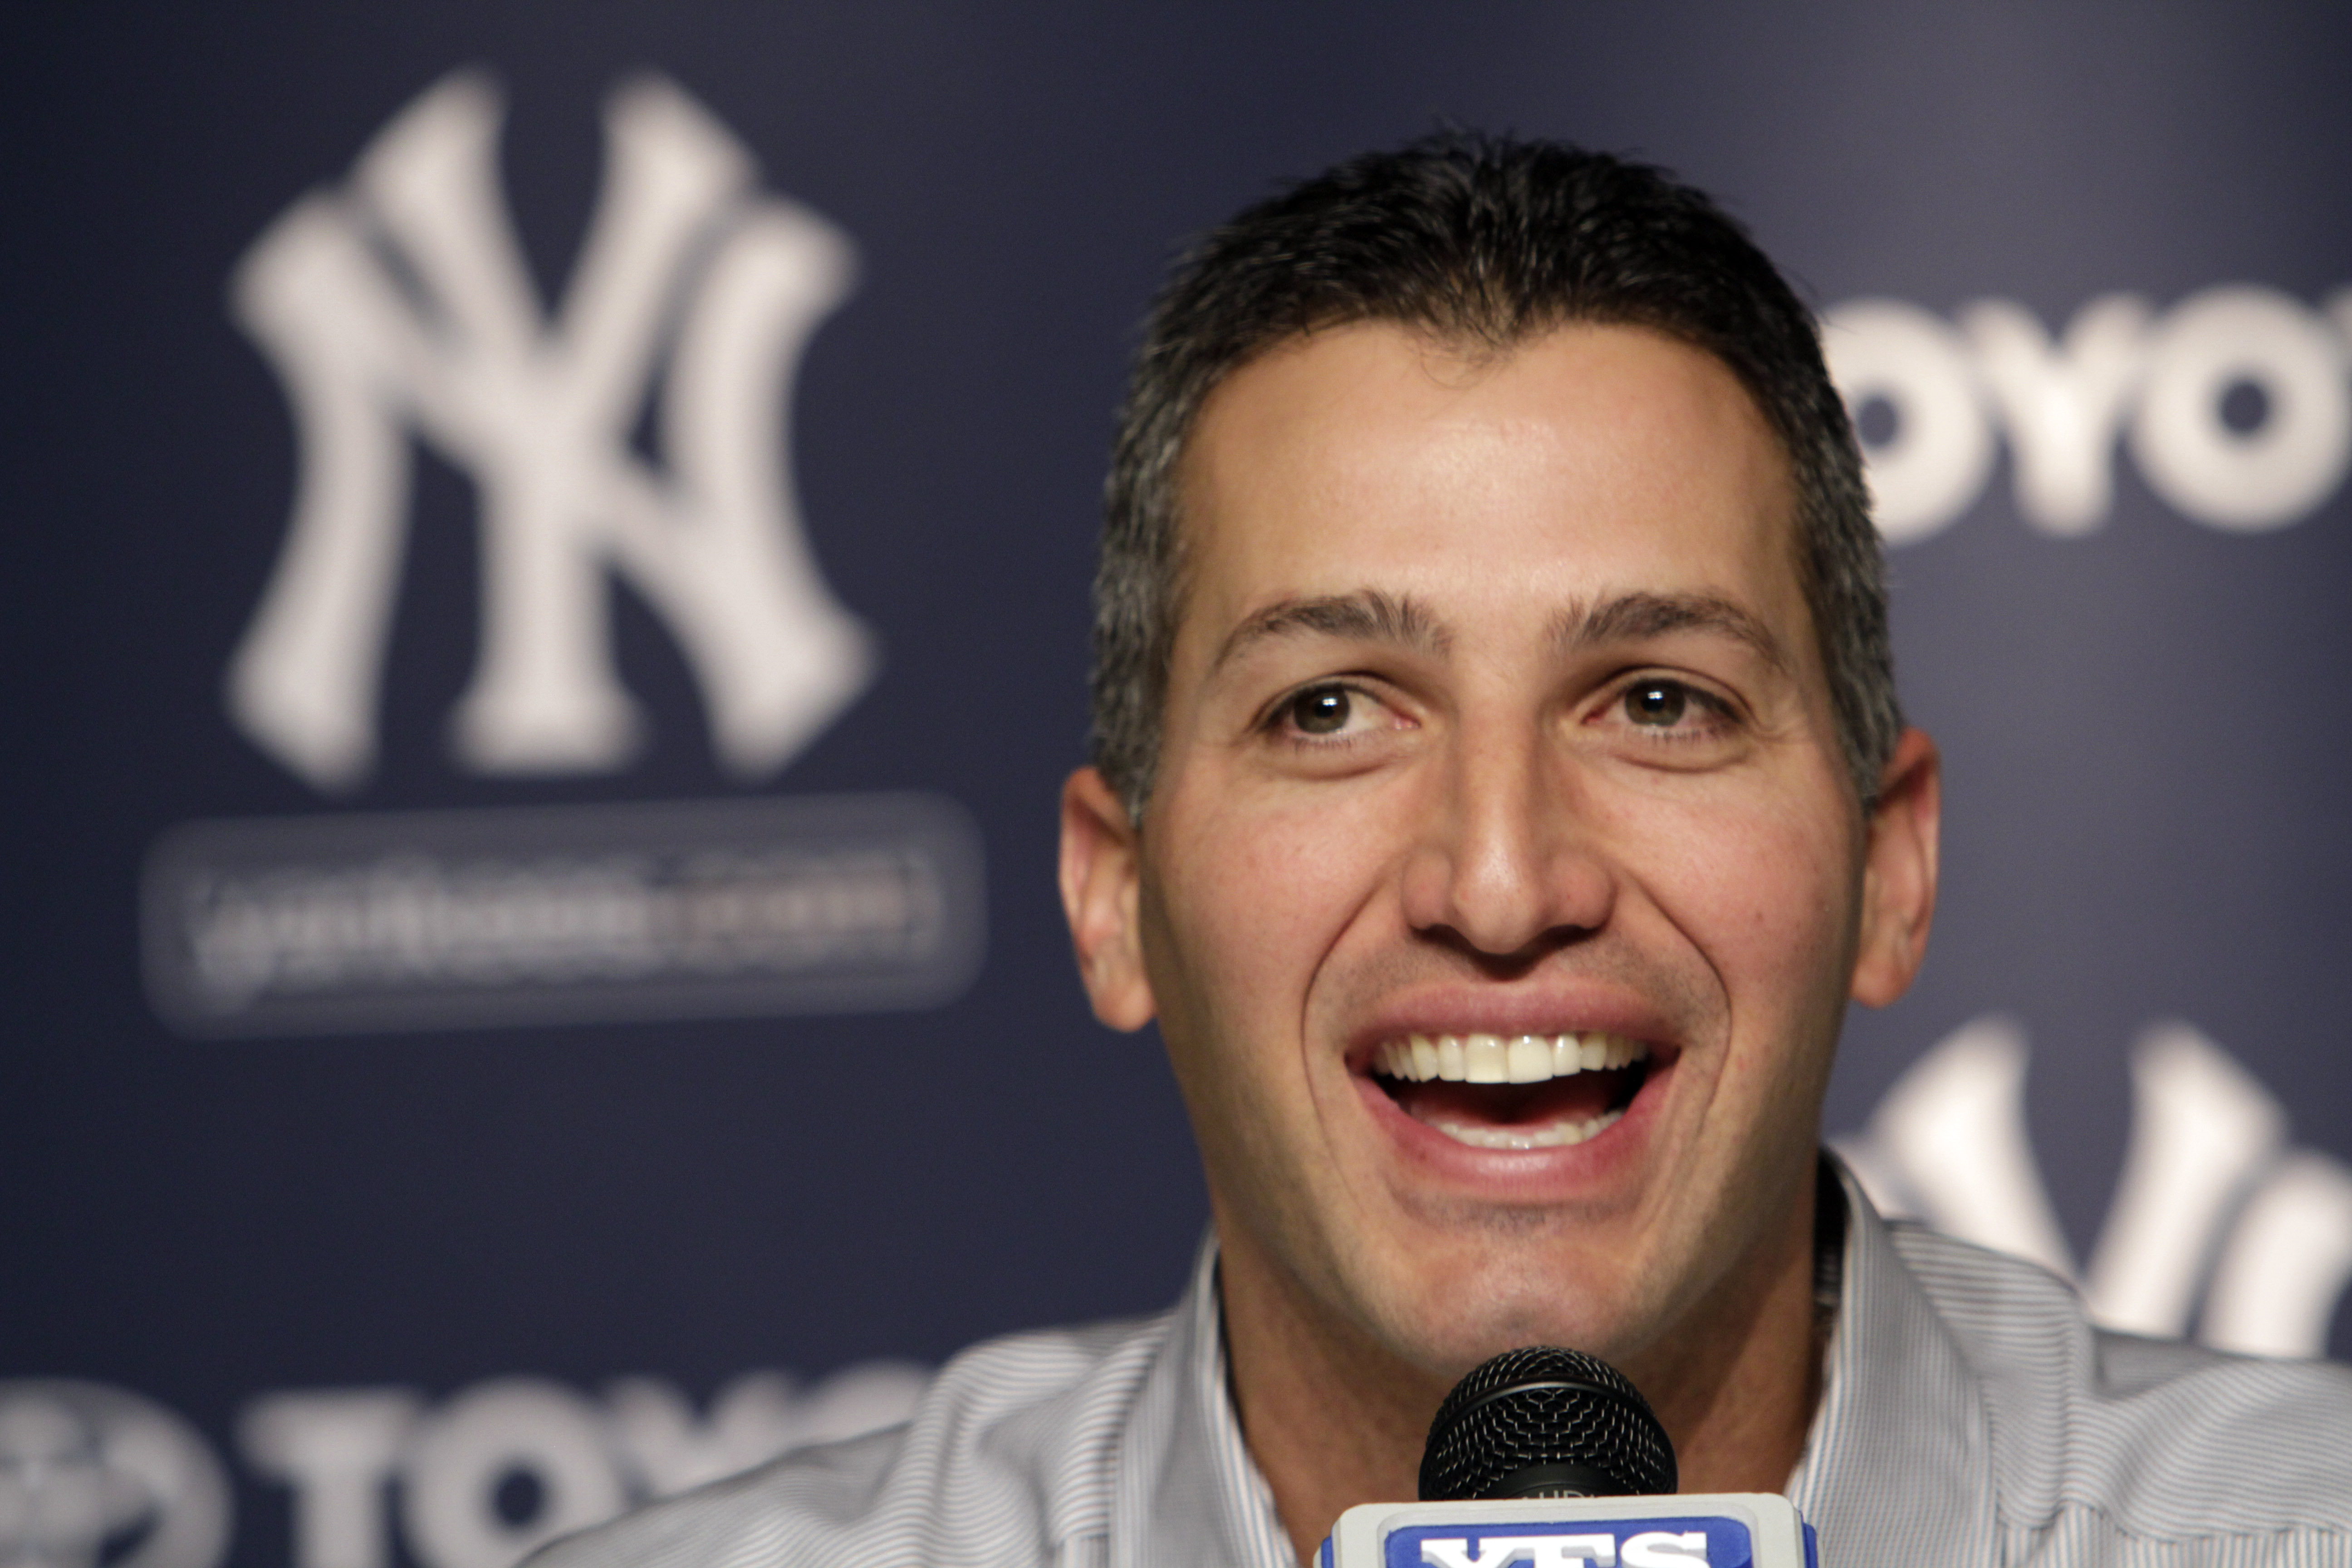 Andy Pettitte returns to New York Yankees in an advisory role